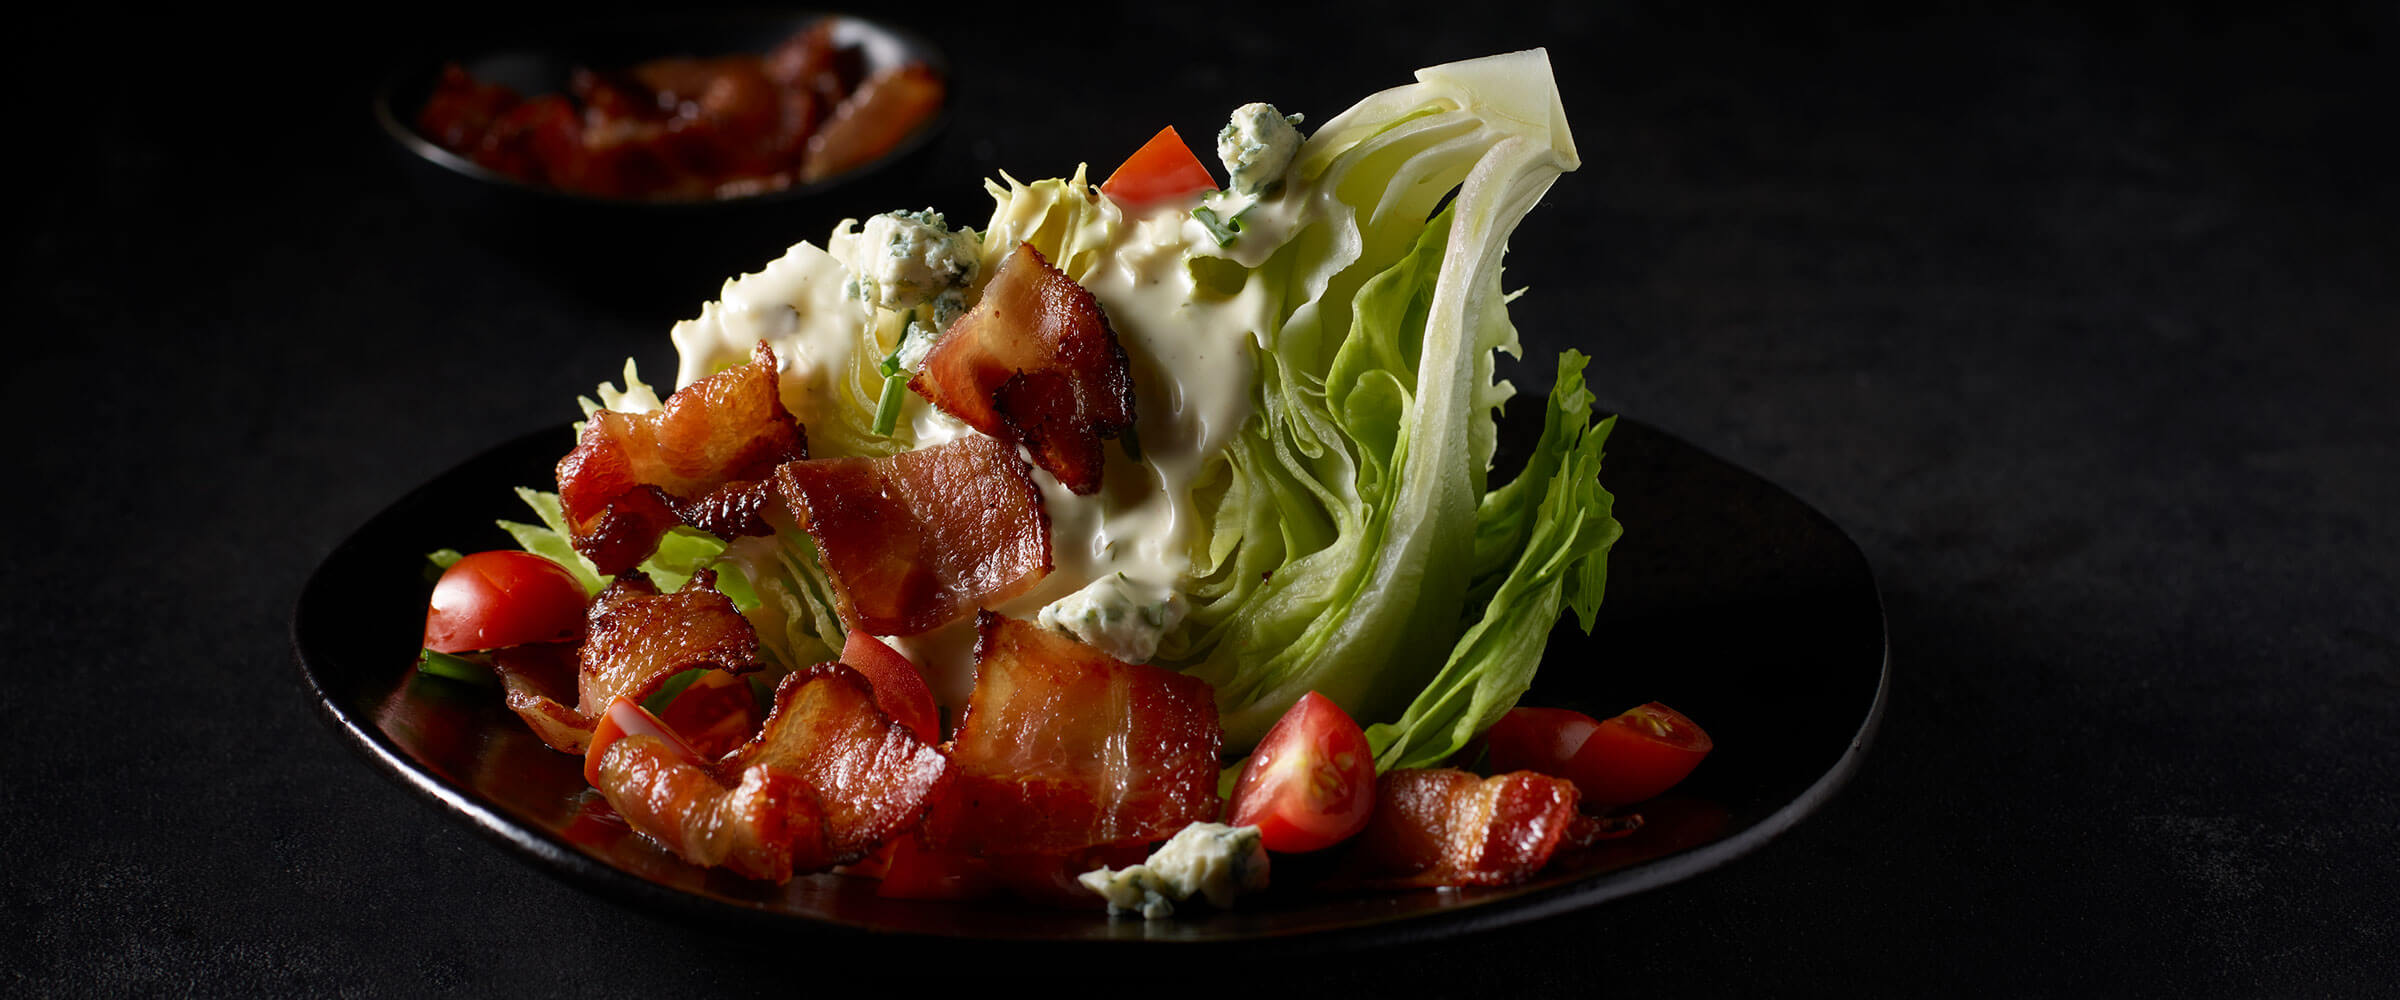 Bacon Wedge Salad on black plate